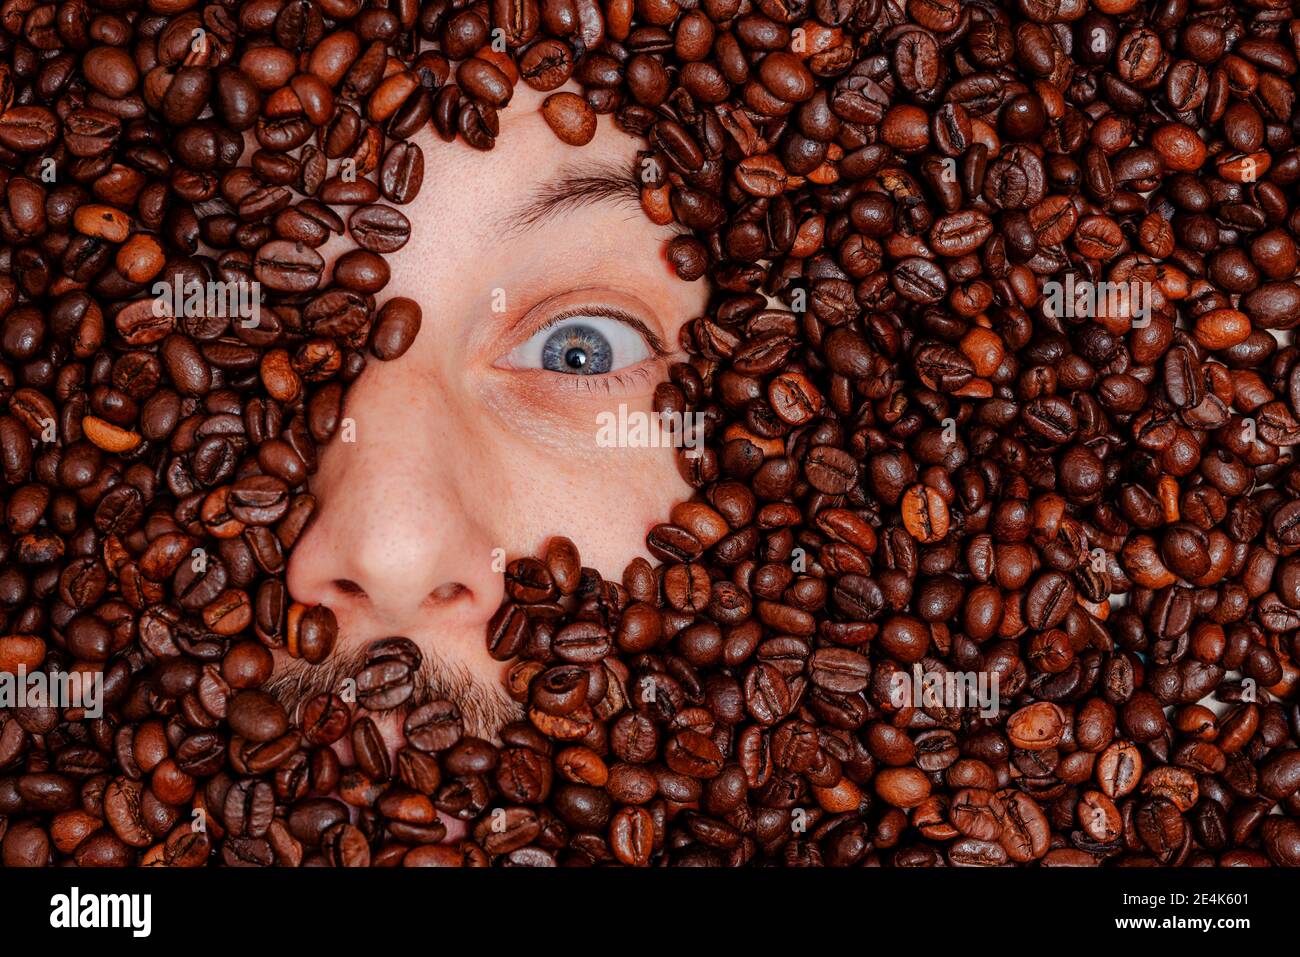 Human face buried in roasted coffee beans Stock Photo